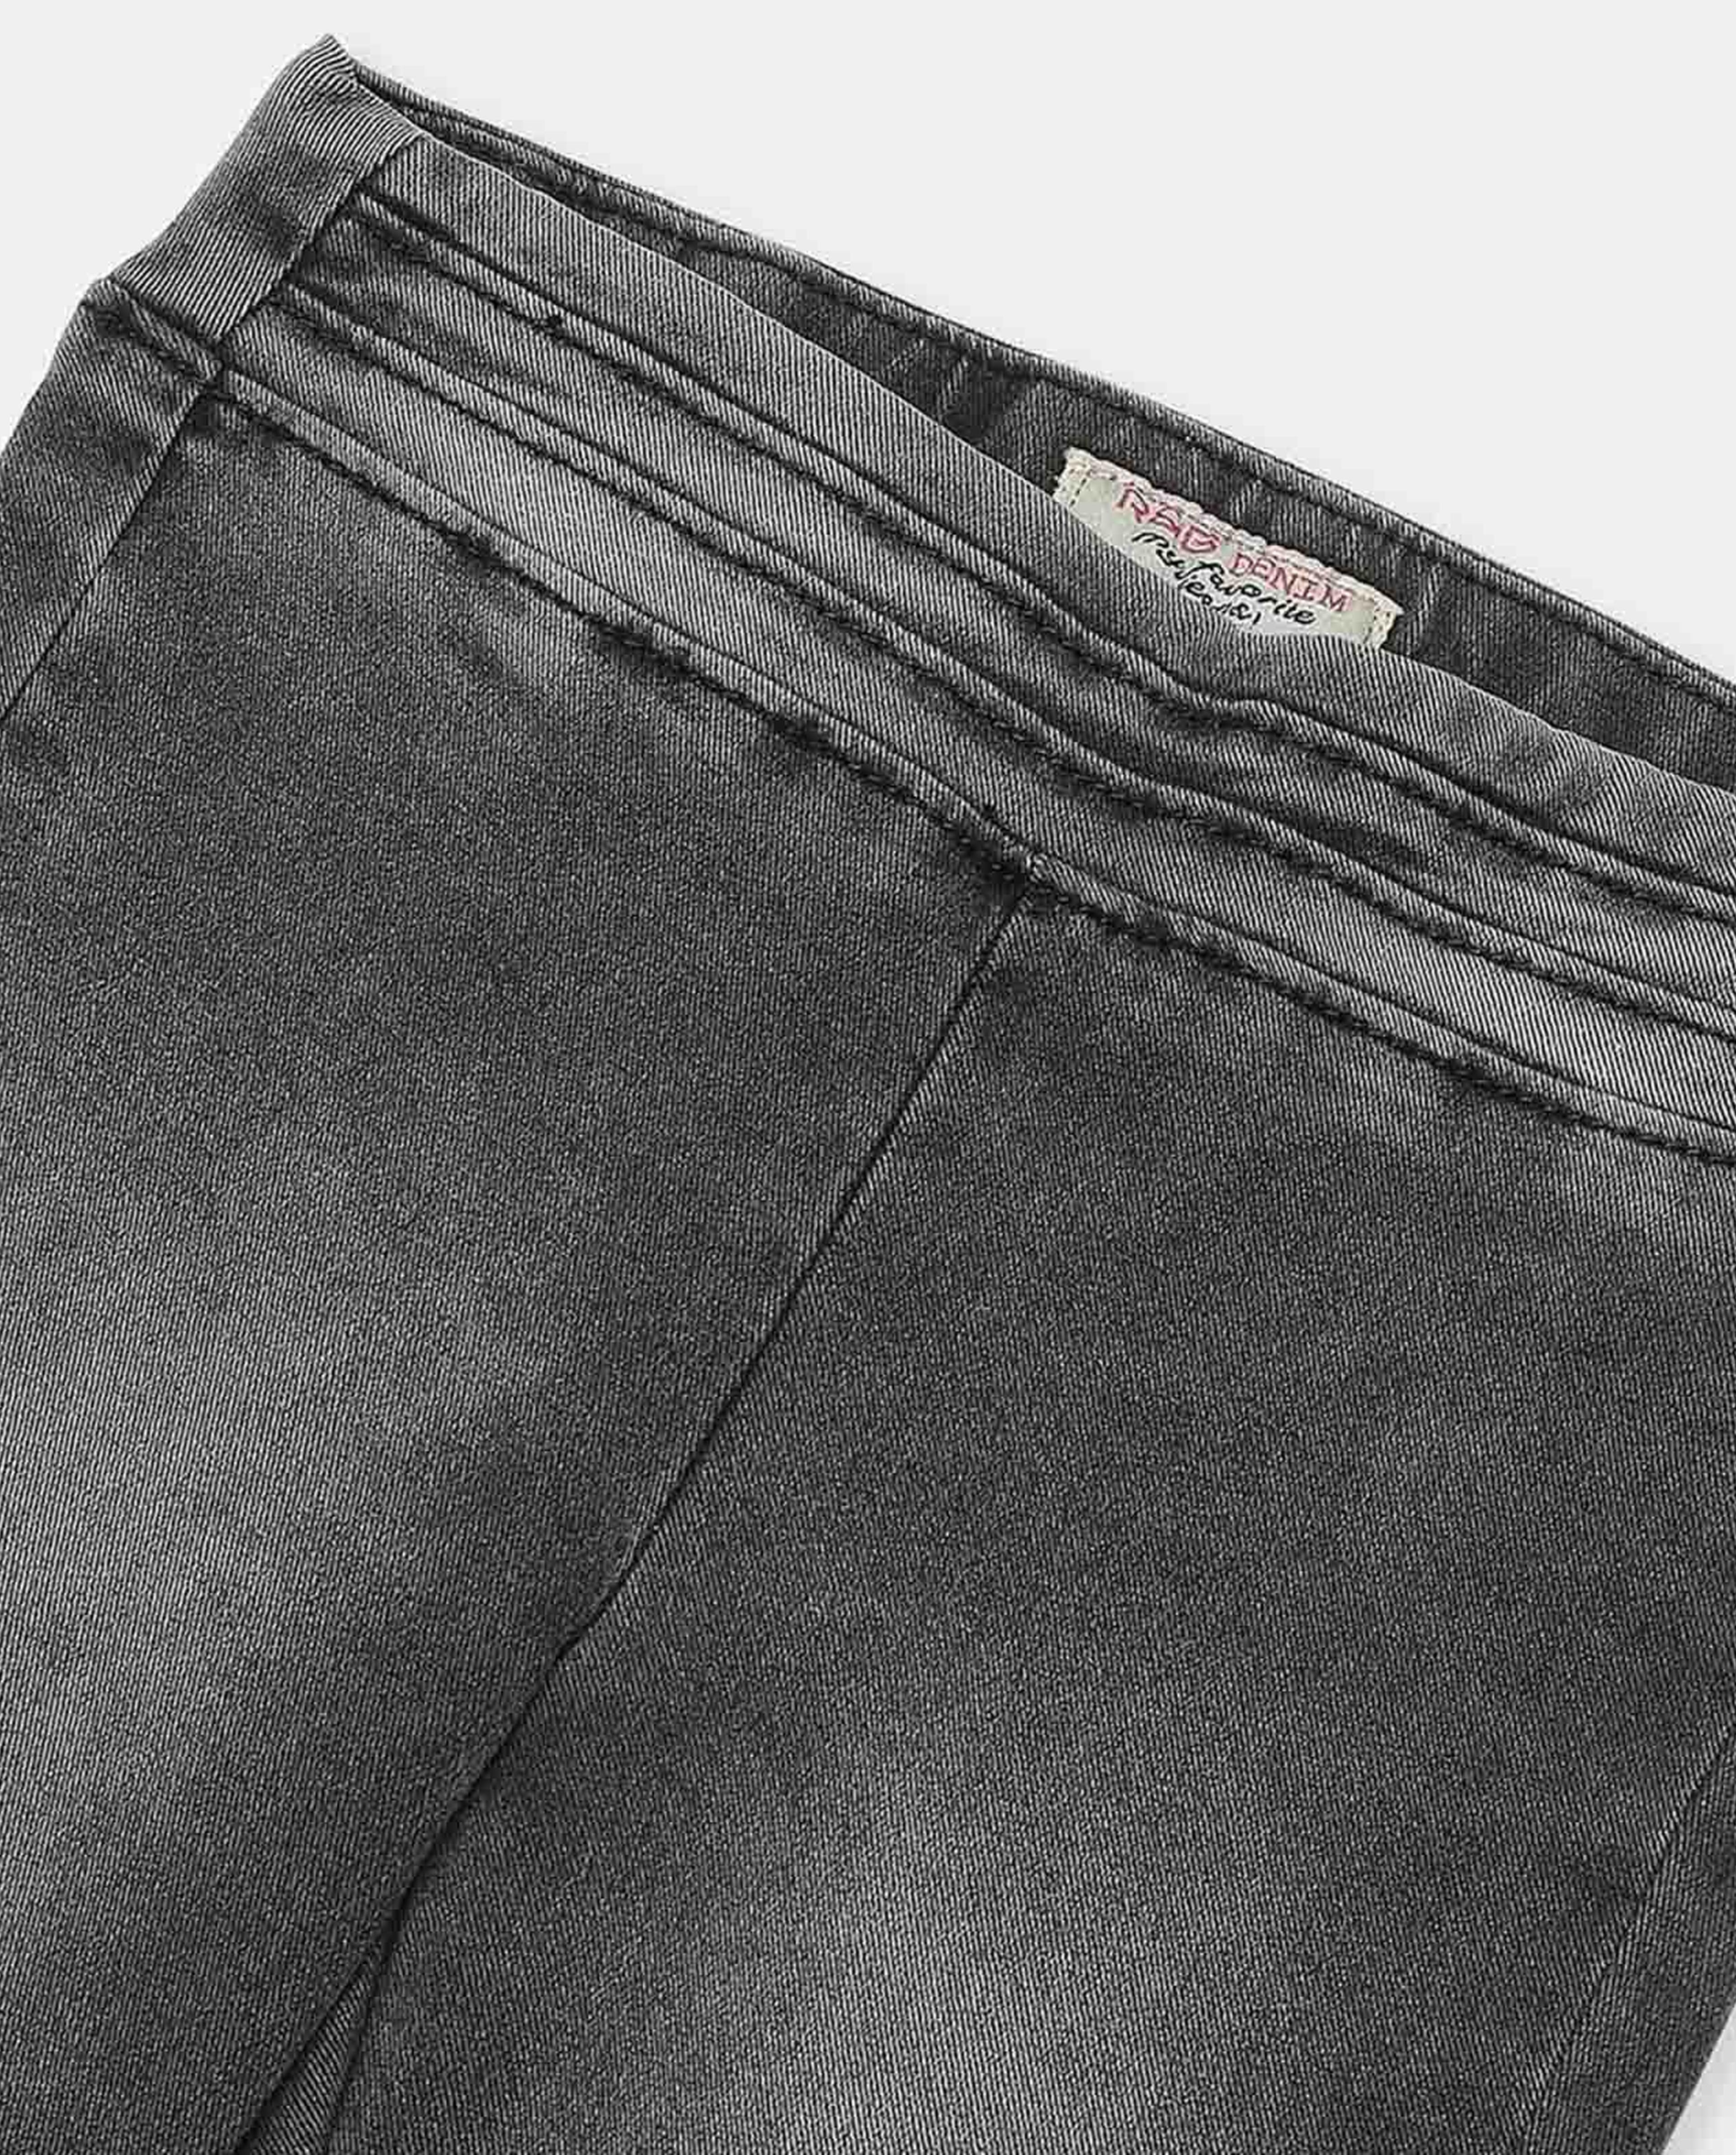 Washed Slim Fit Denim Jeans with Elasticated Waist